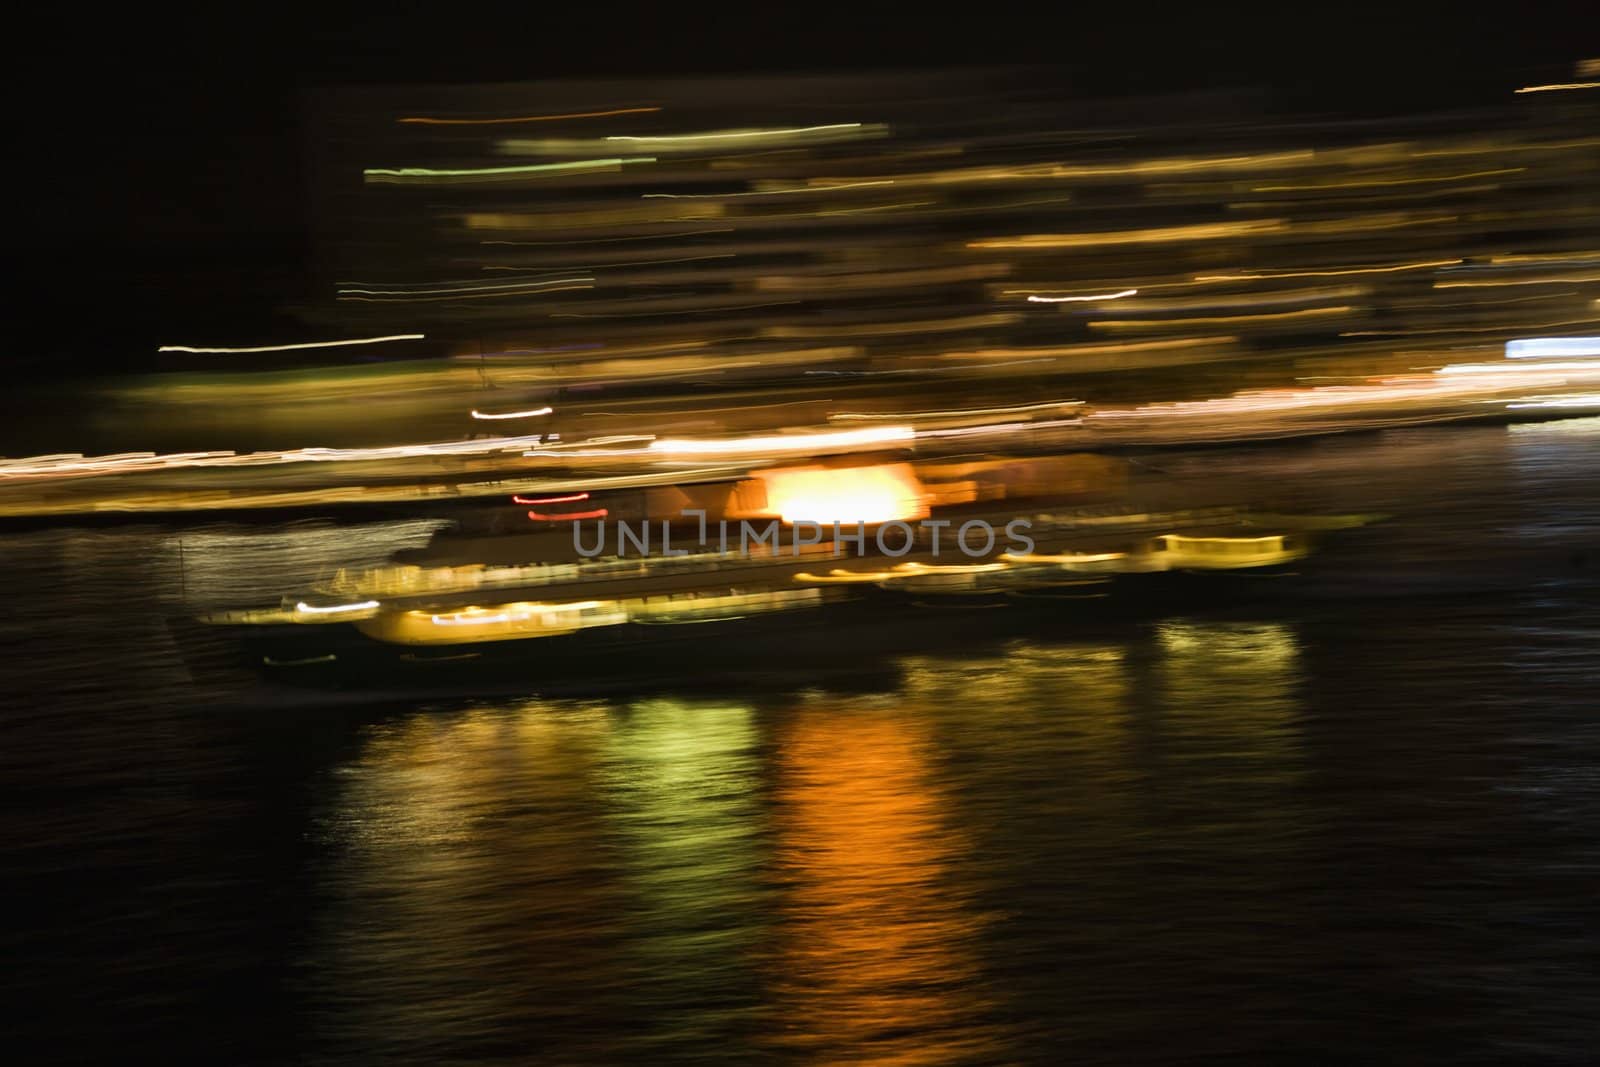 Blurred lights at night reflected on Sydney Harbour in Sydney, Australia.